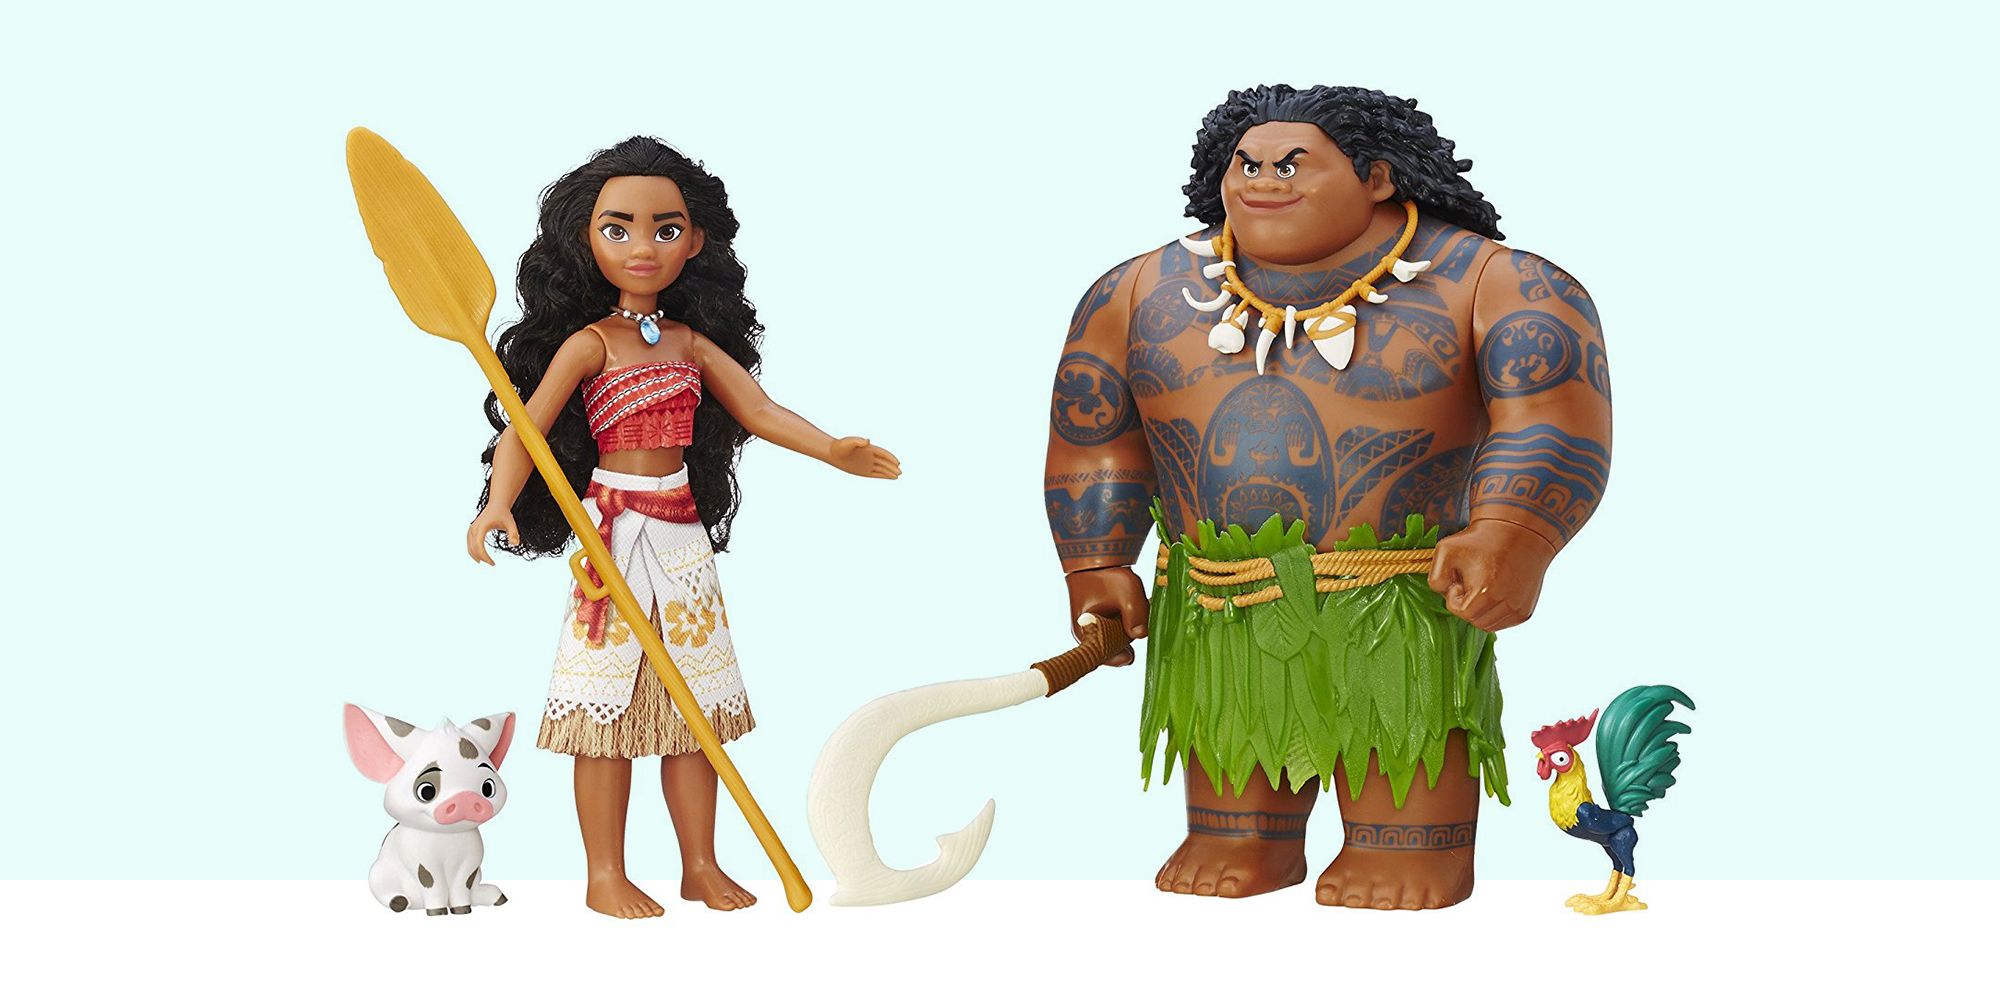 7 Best Moana Toys for Kids in 2018 - Moana Inspired Toys and Games From the  Movie